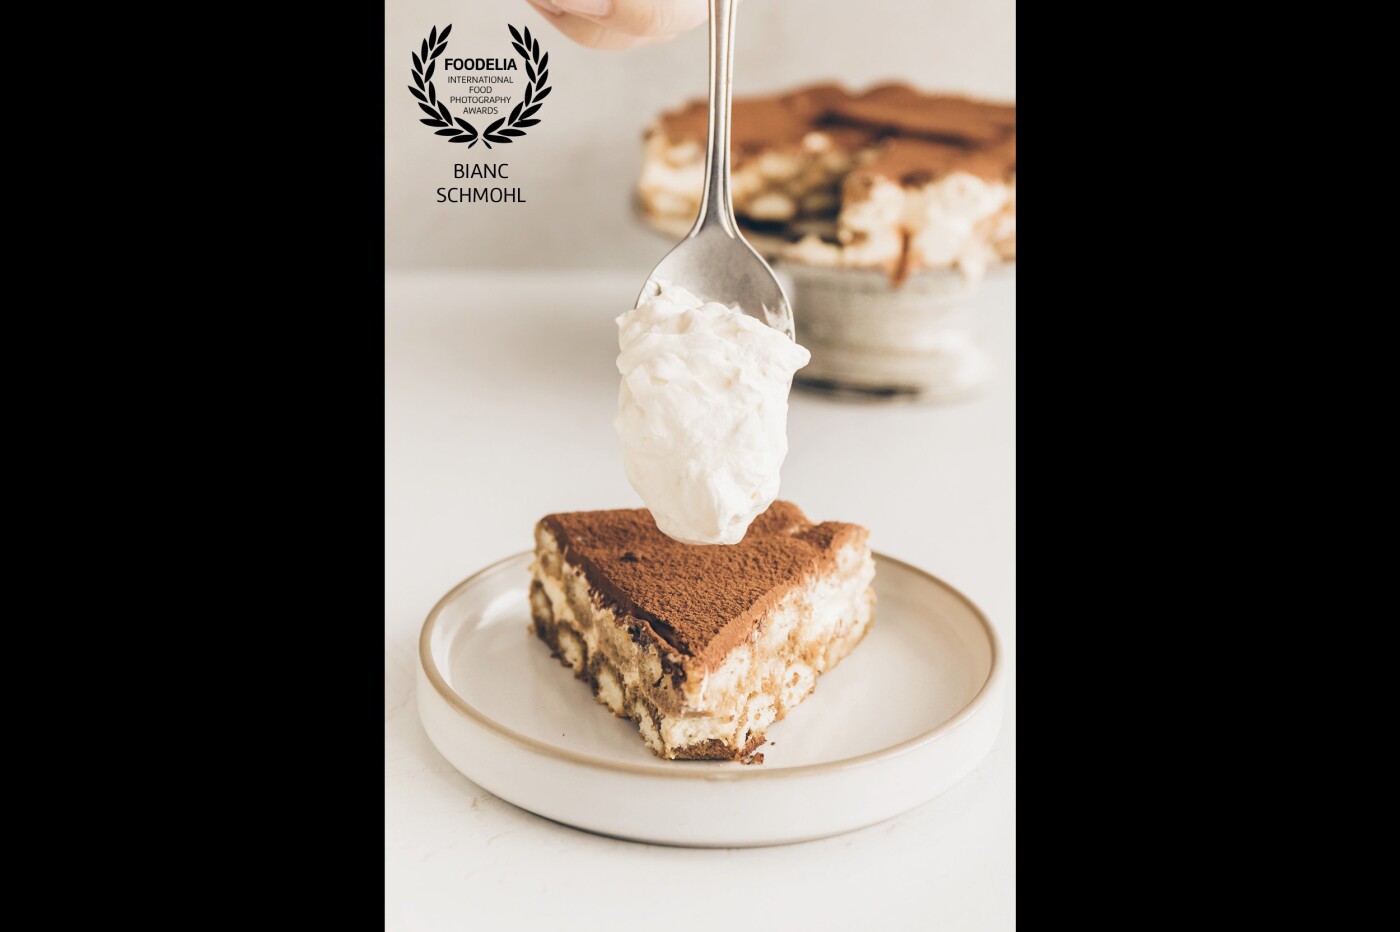 Tiramisu is one of my favourite dessert dishes. Although basic ingredients are quite similar throughout, there is much more versatility in tiramisu than you might expect. 